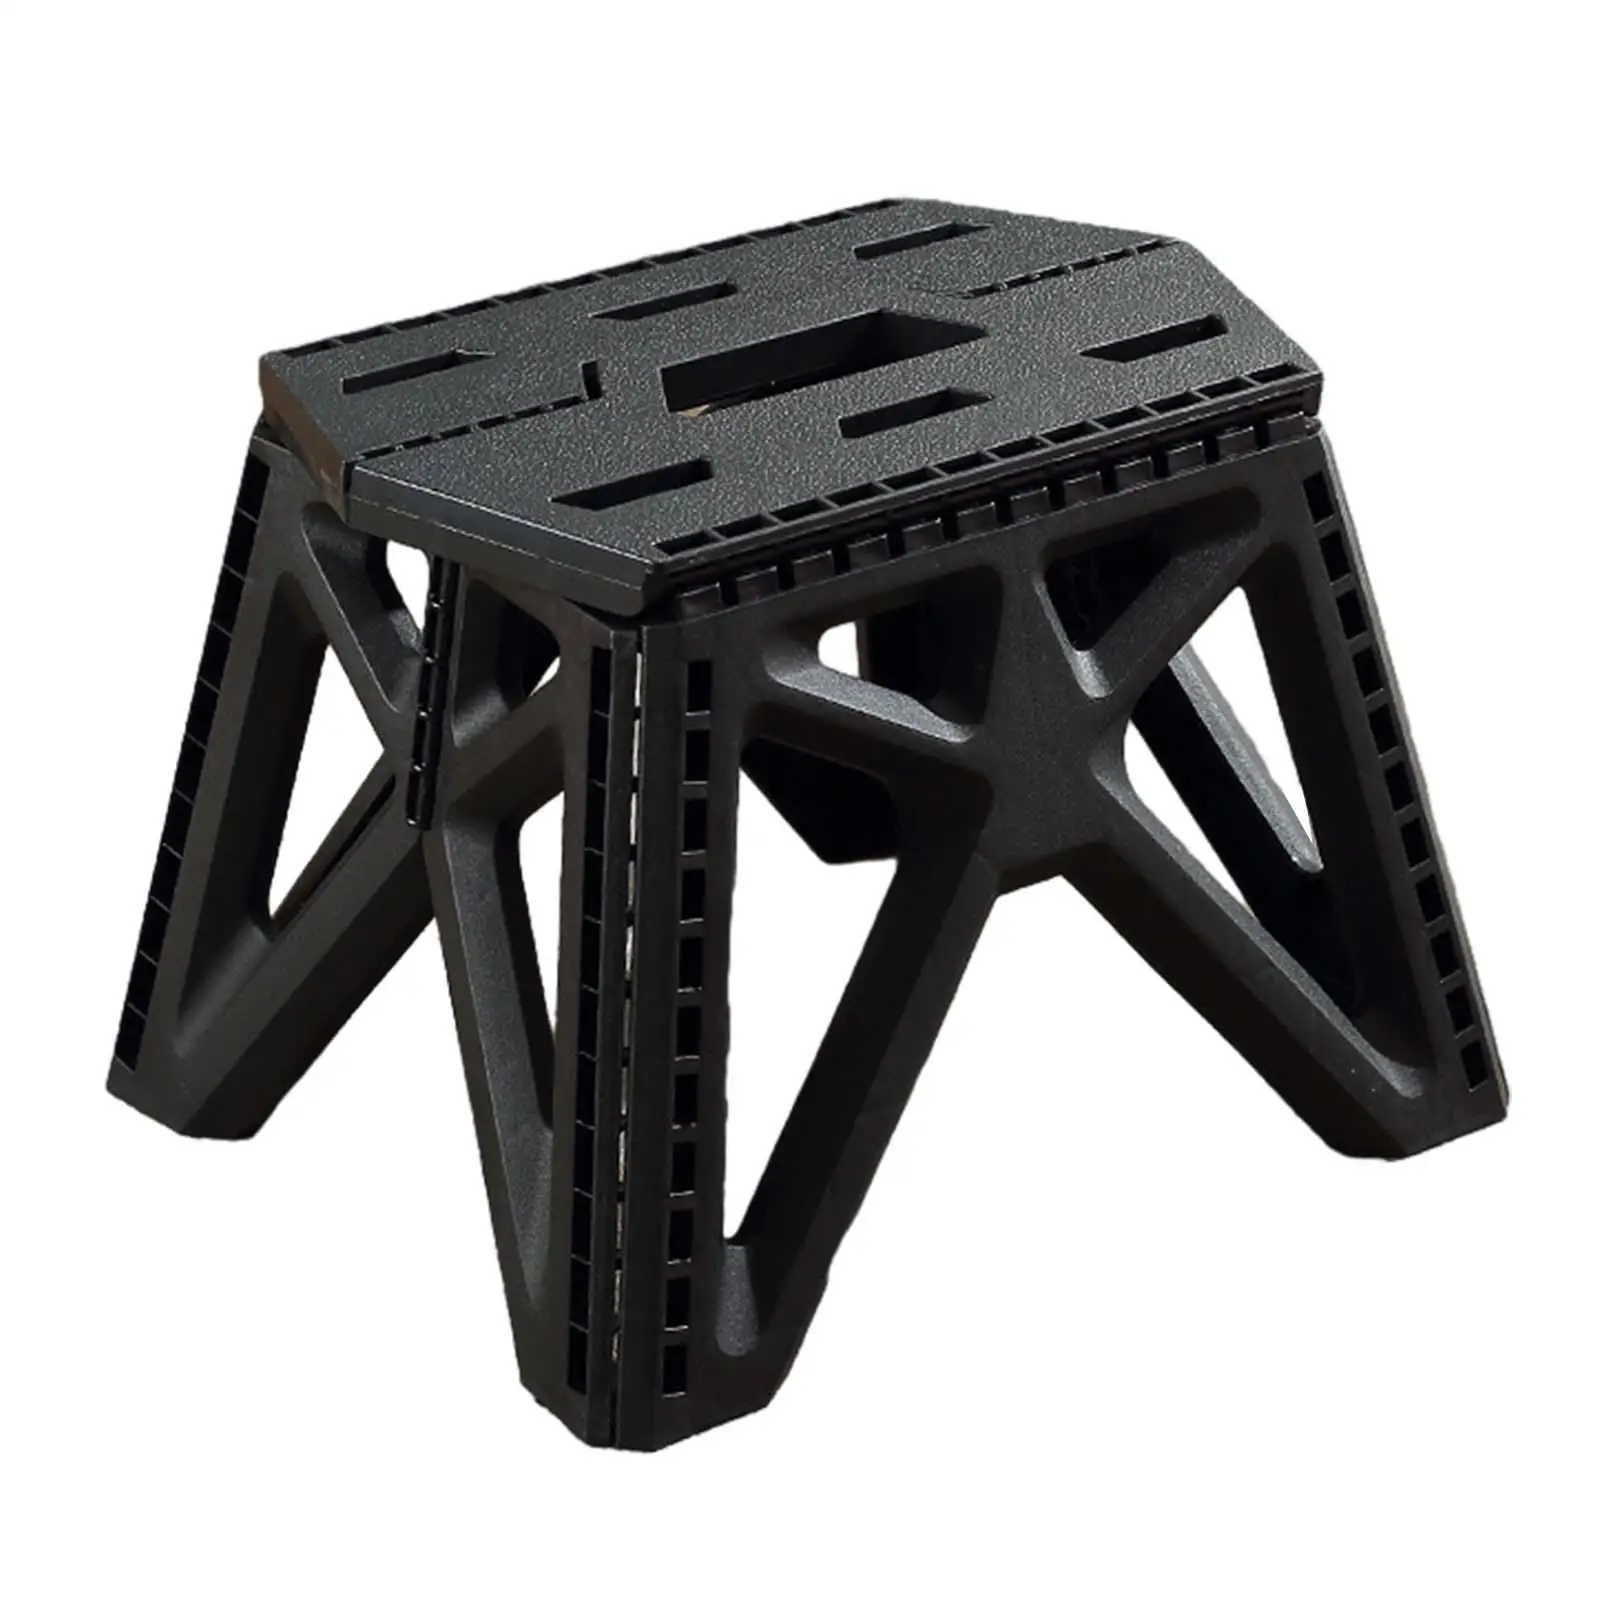 Folding Camping Stool Portable Collapsible Stool for Garden Fishing Hiking